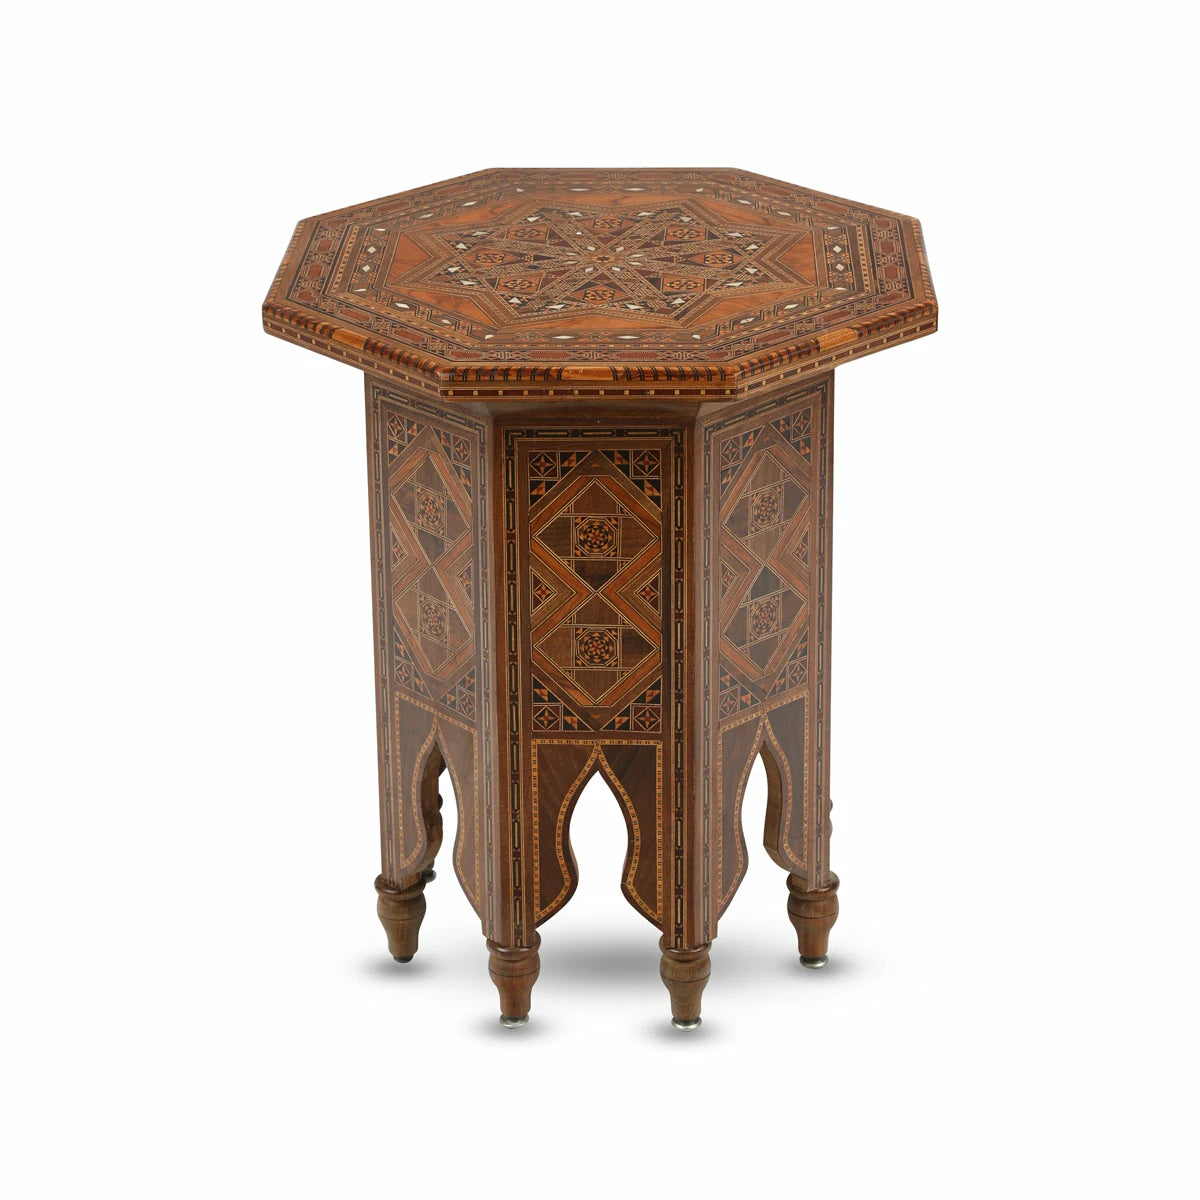 Classic Mother of Pearl, Mosaic & Marquetry Inlaid Moorish / Islamic Coffee Table